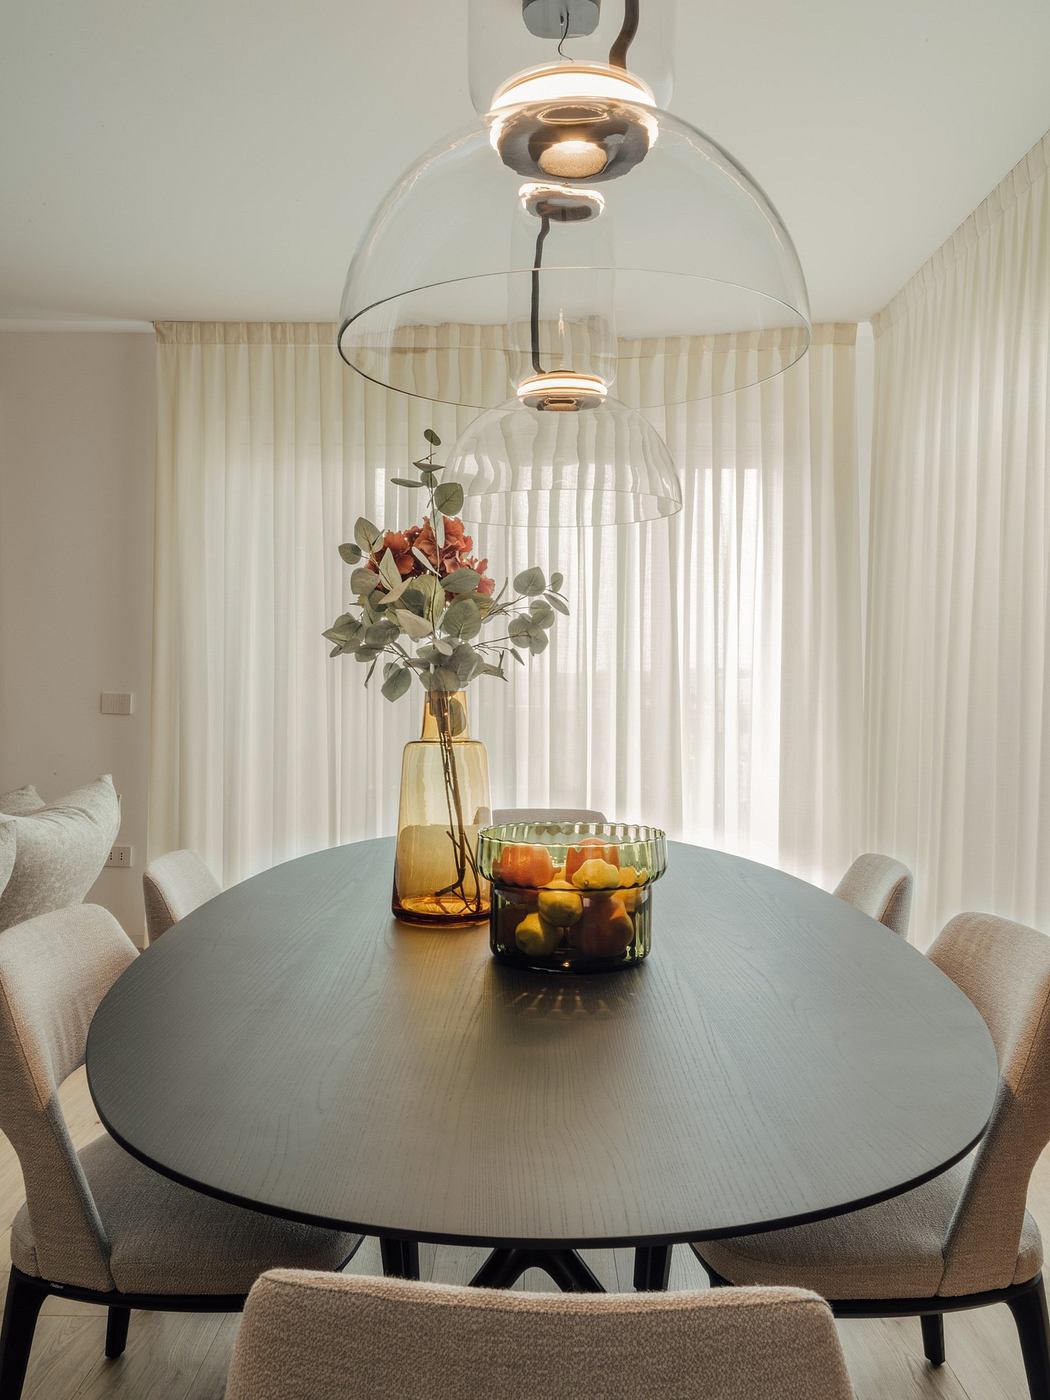 Modern dining area with a round table, pendant light, and sheer curtains.